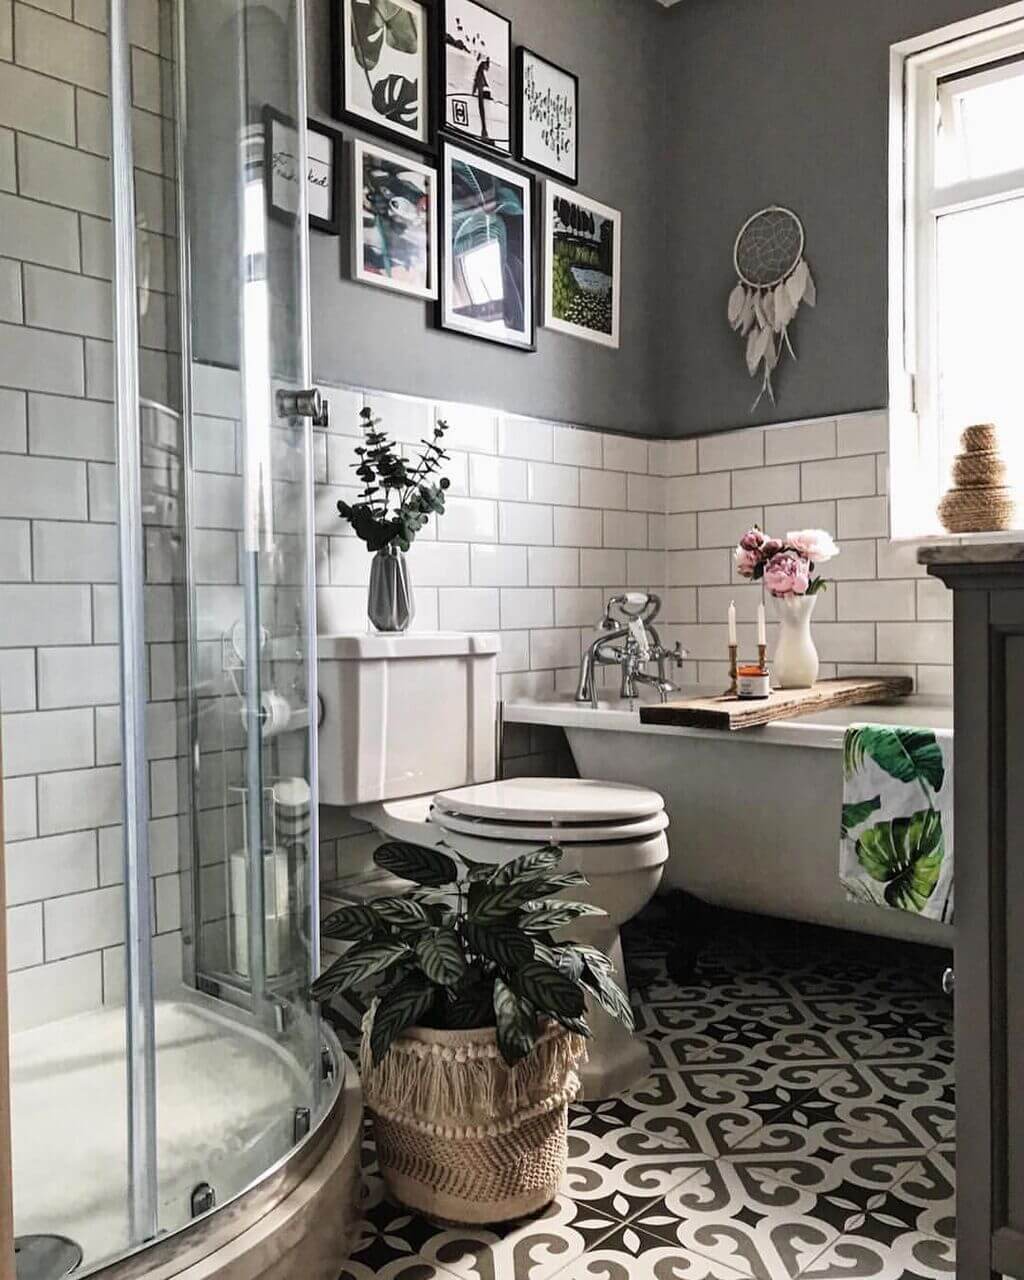 A bathroom with a tub, toilet, sink and pictures on the wall
